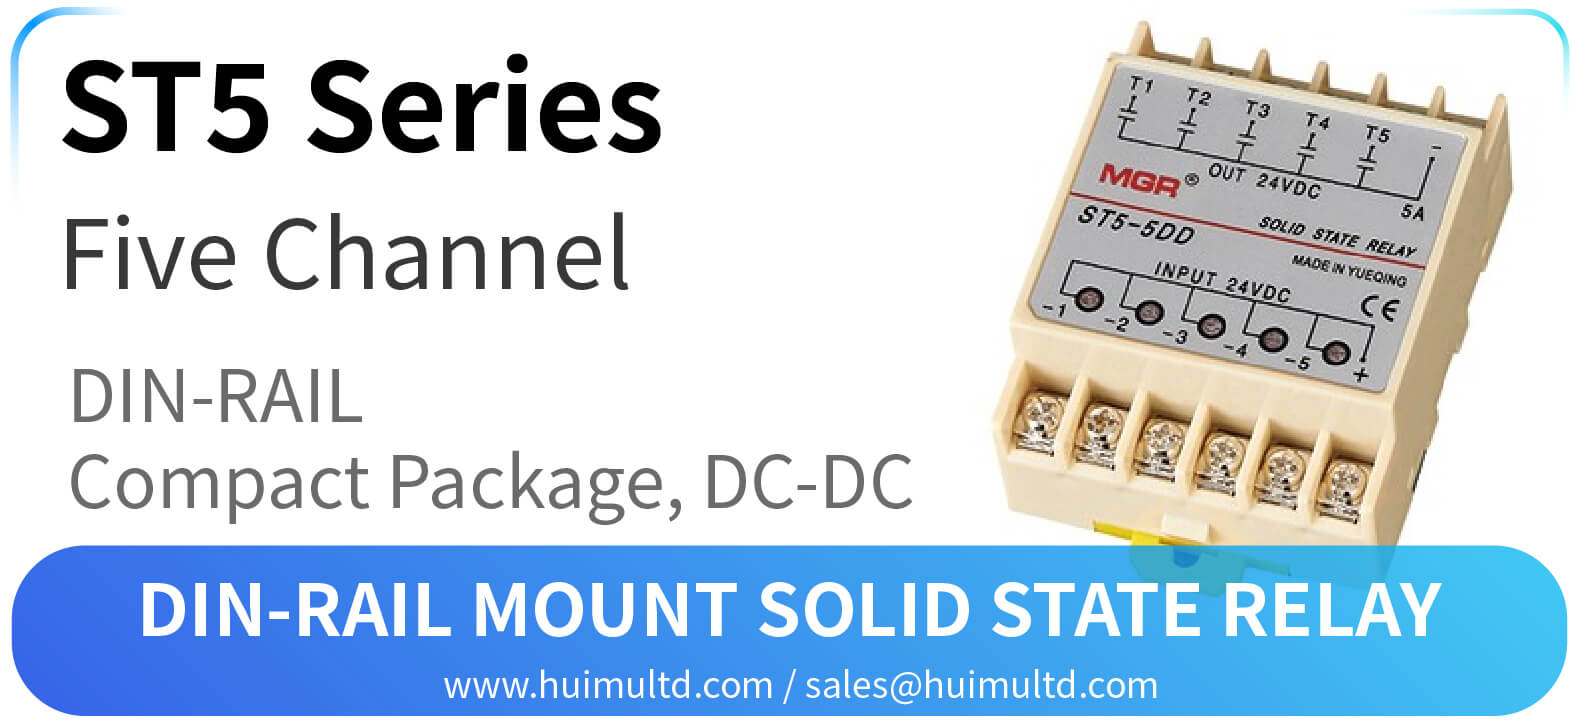 ST5 Series DIN-Rail Mount Solid State Relay